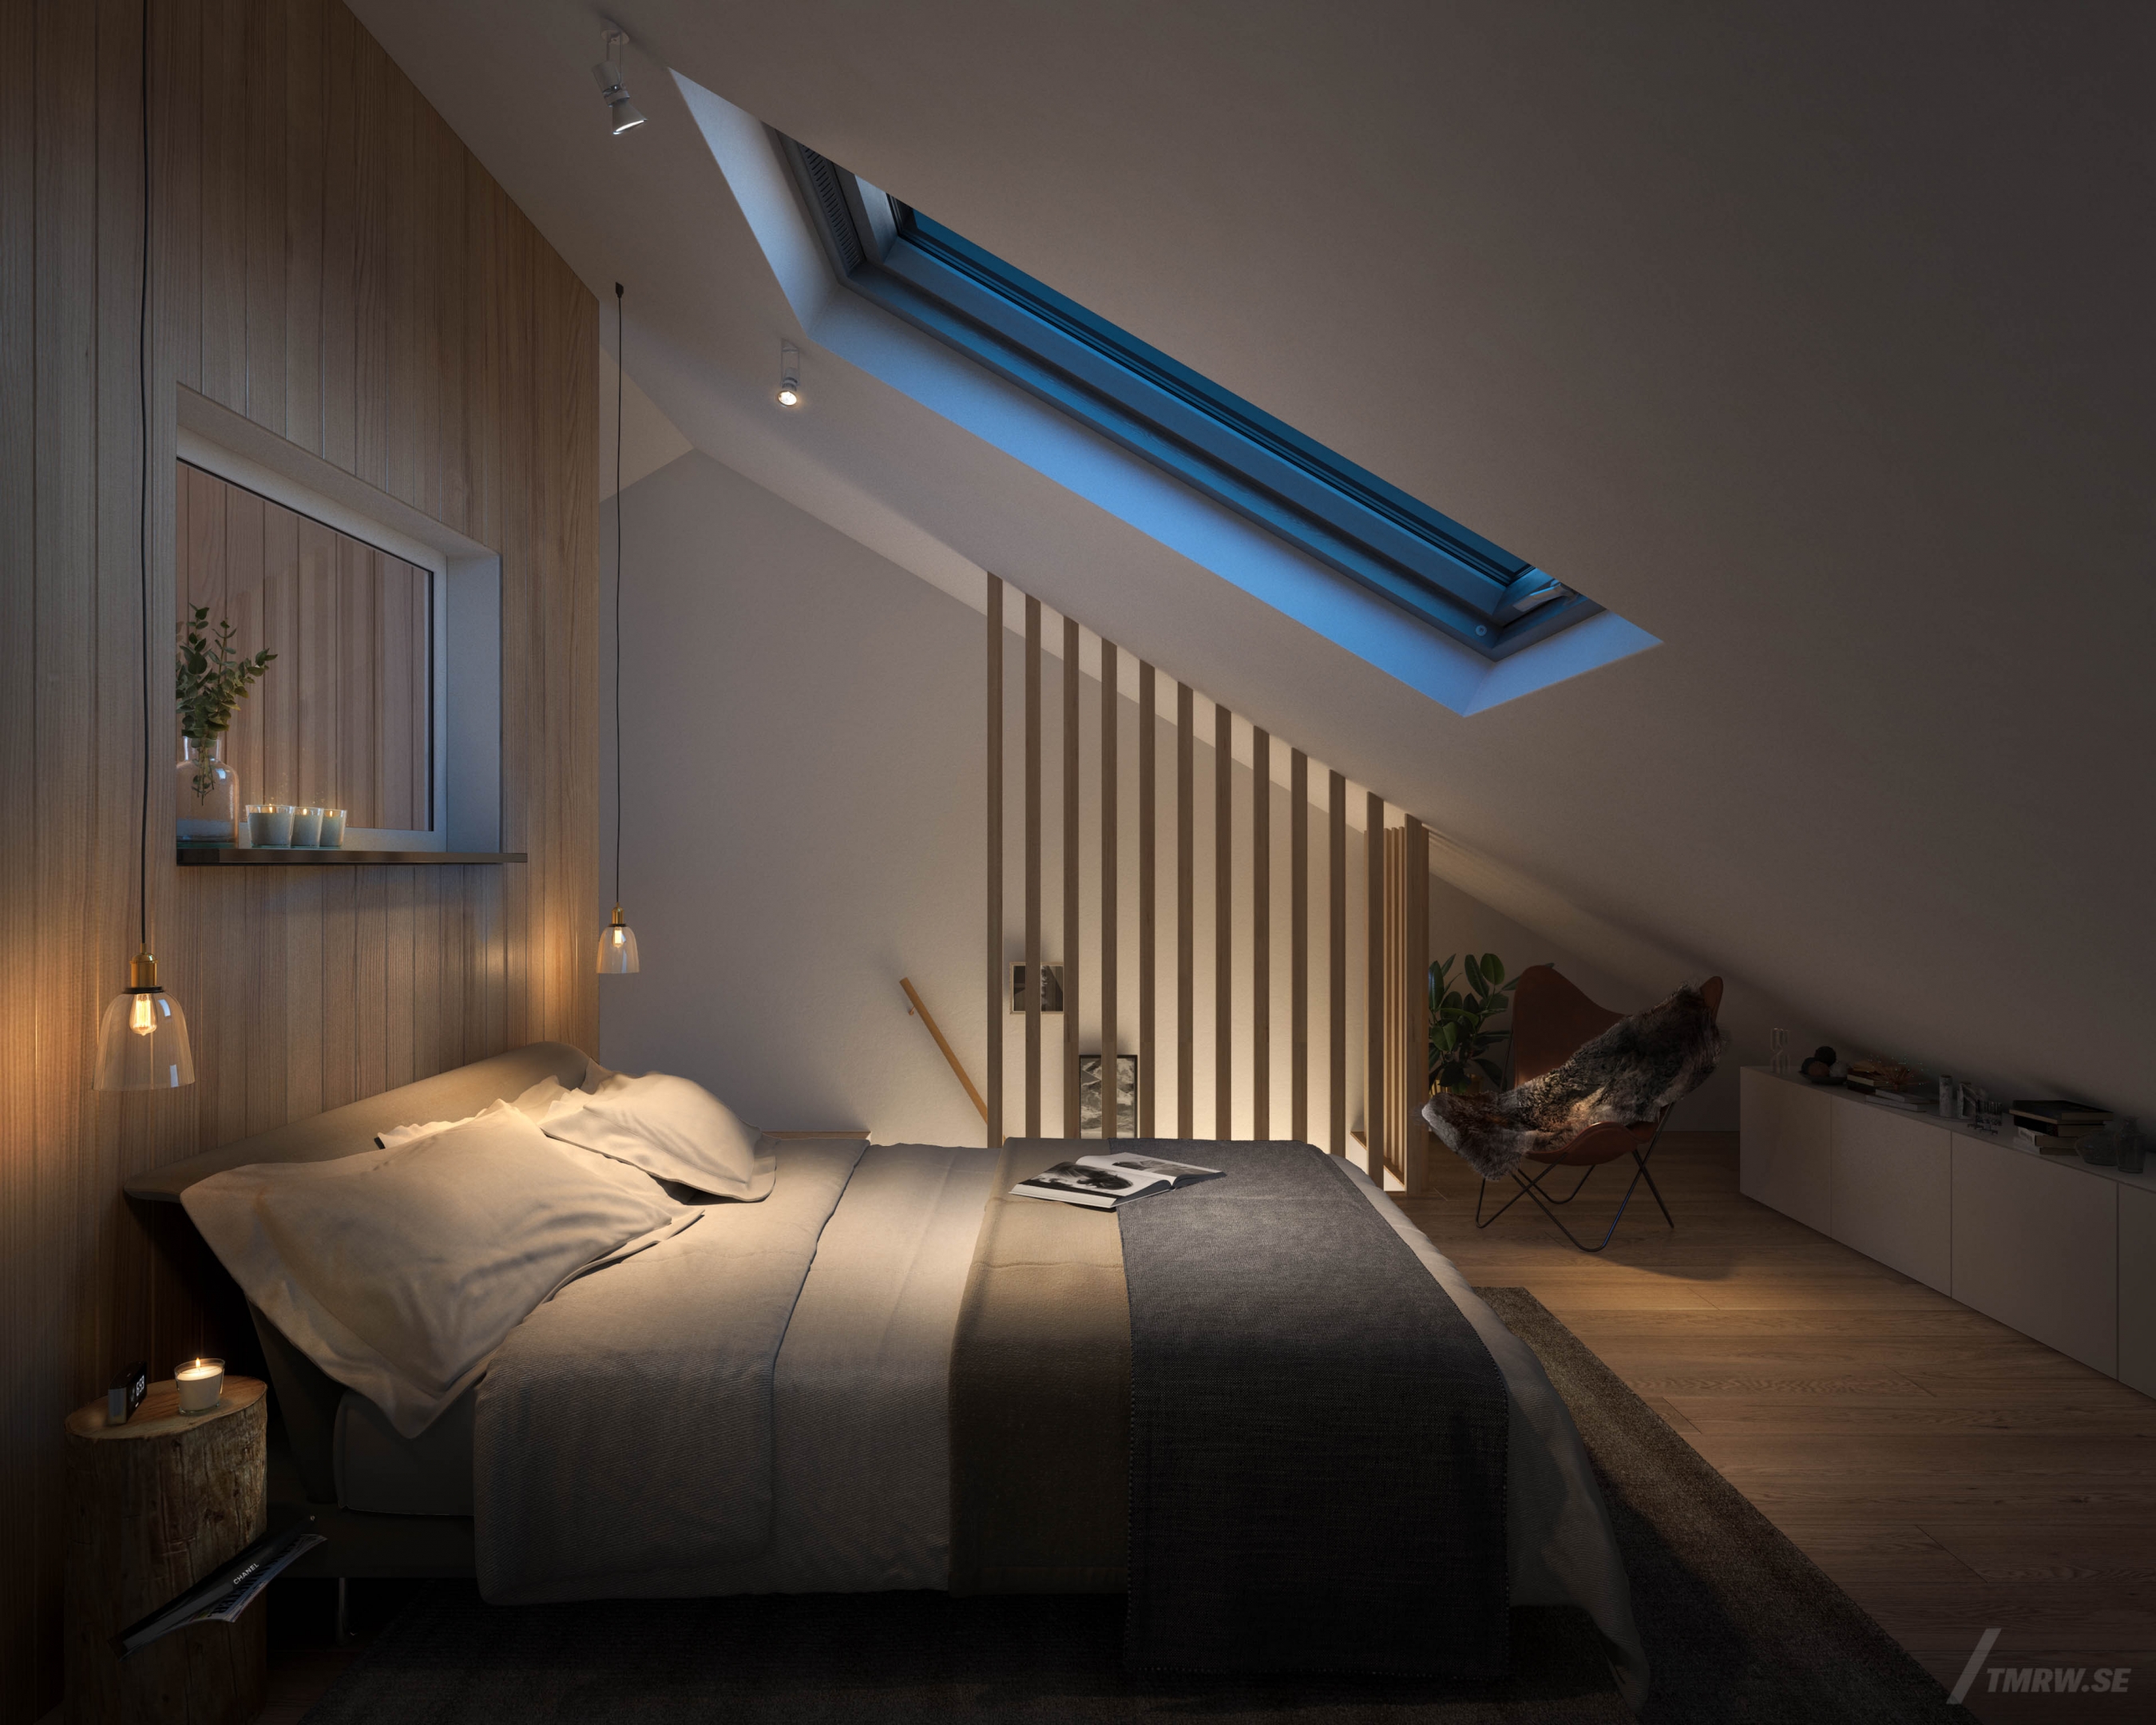 Architectural visualization of Slopen for Bleck, bedroom with roof window, dusk outside